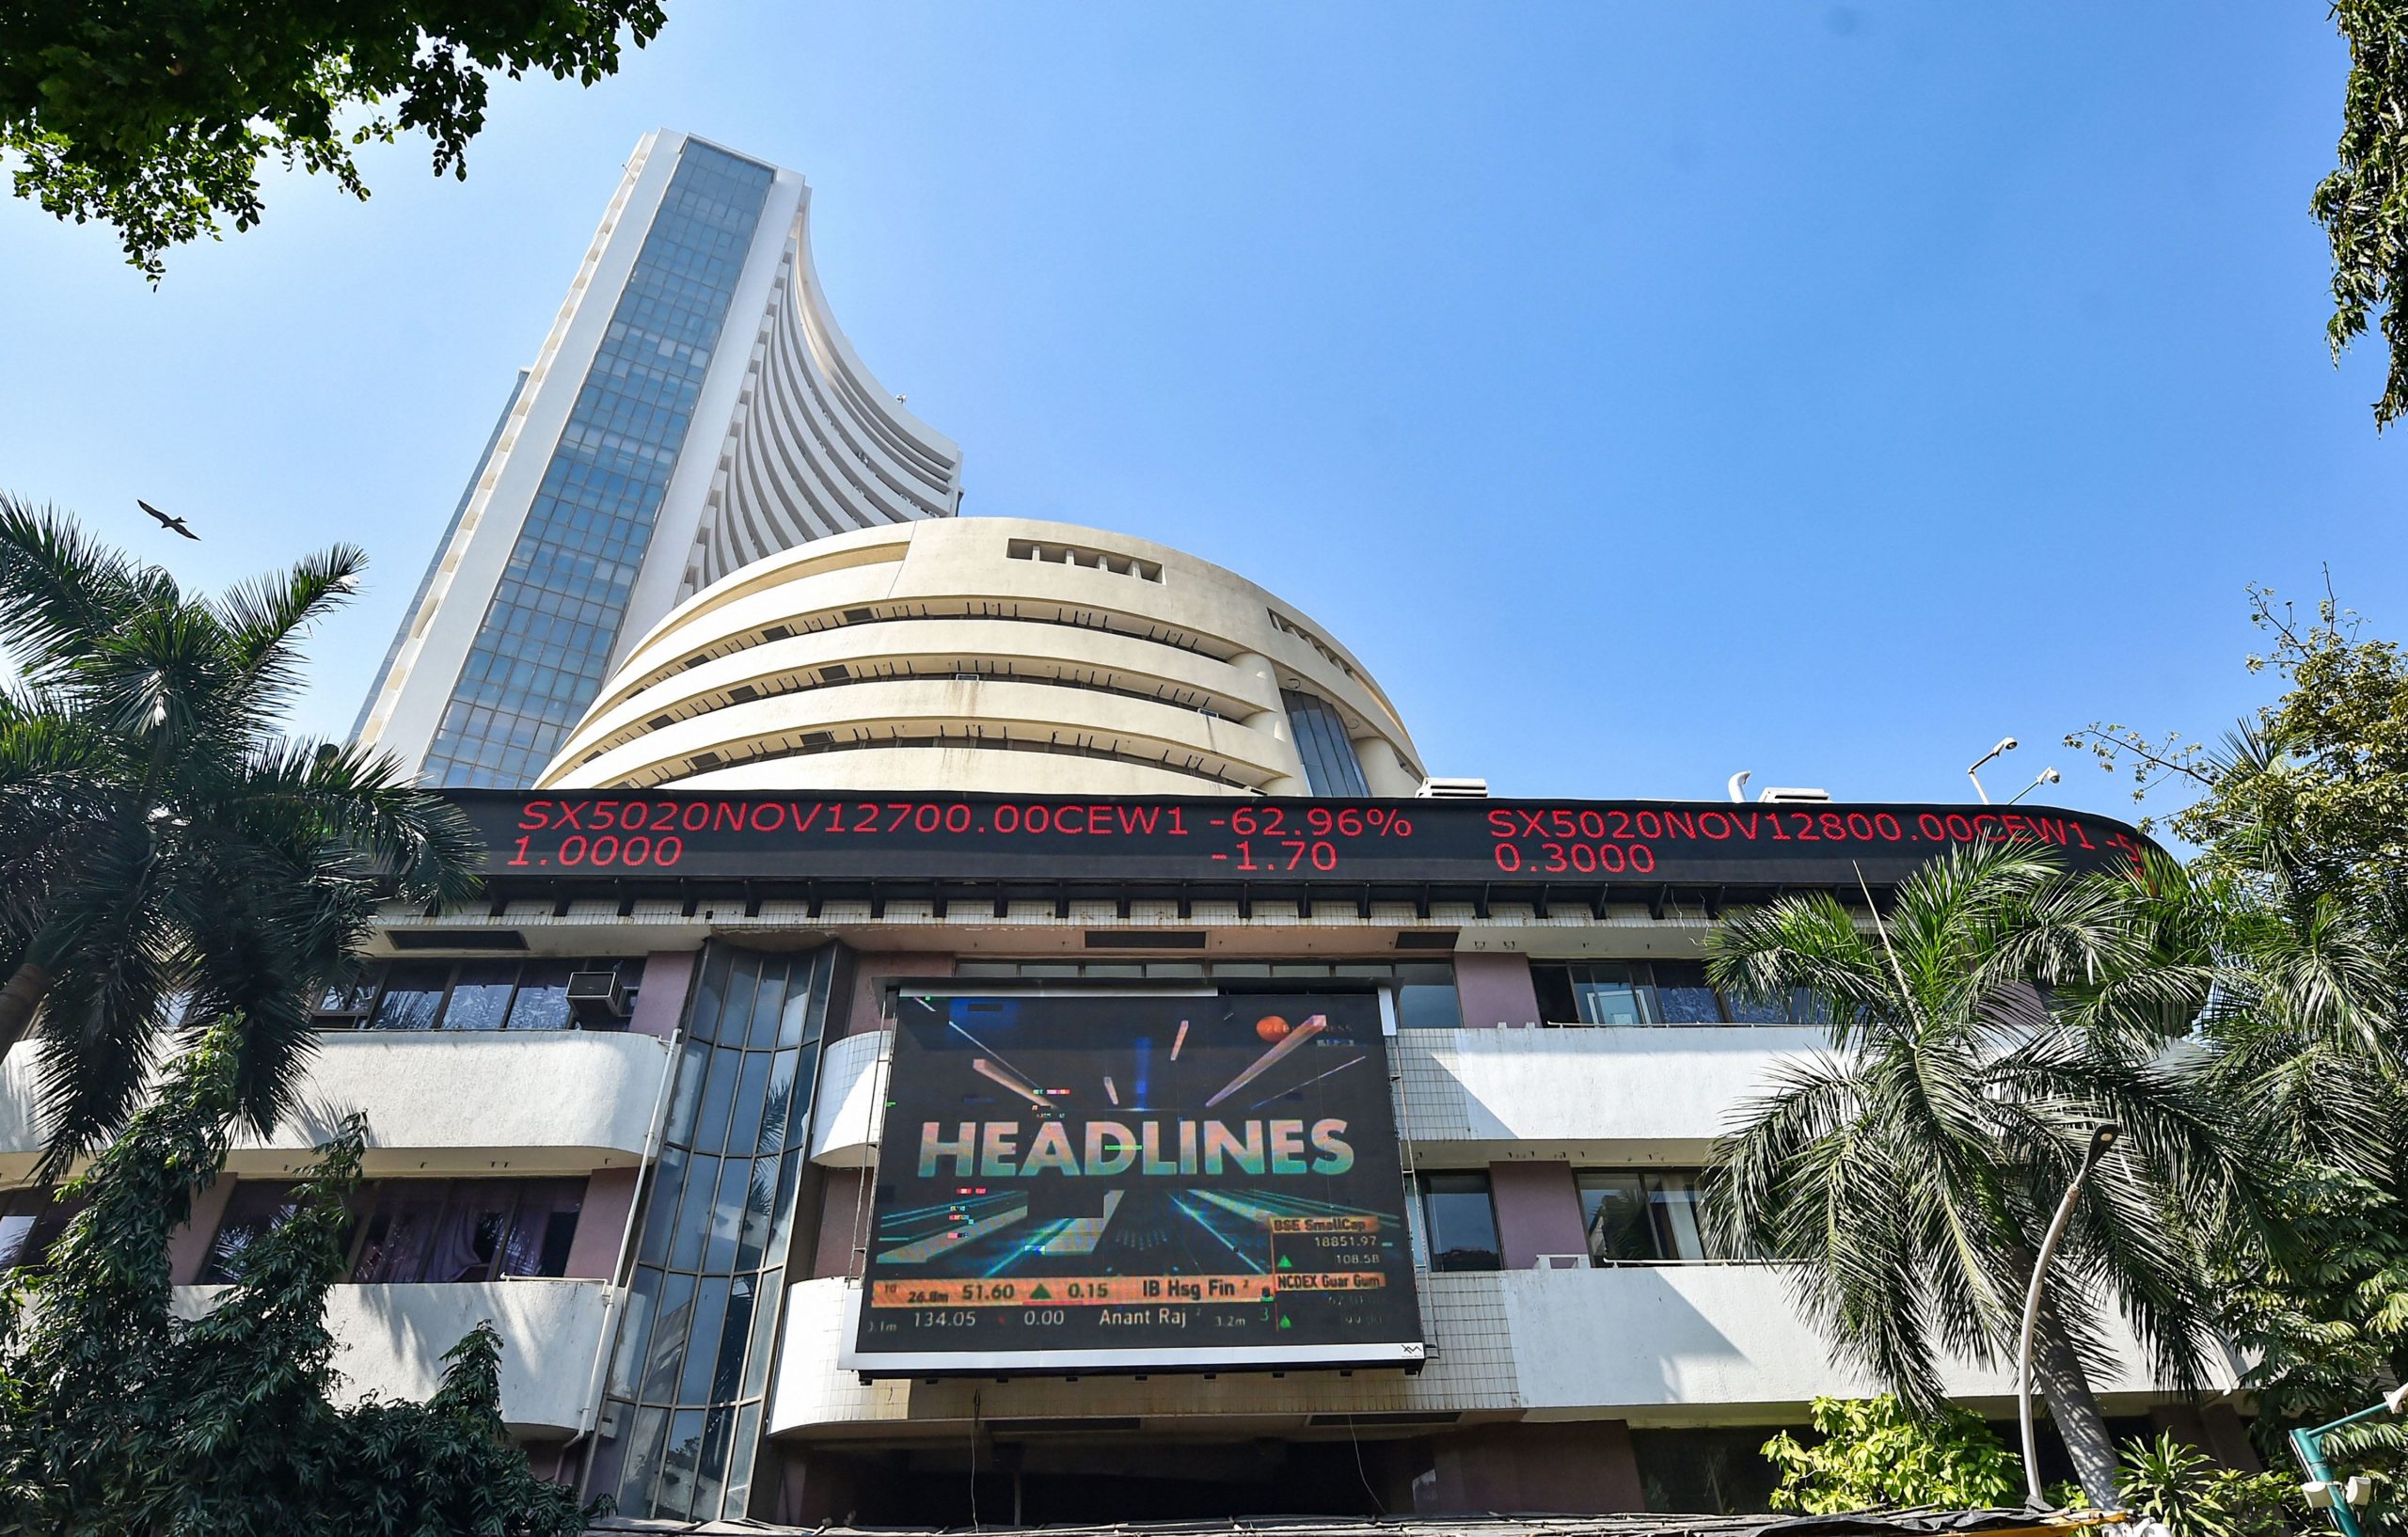 Trending Stocks: RIL, BoB, Indiamart, Vedant Fashions and others in news today